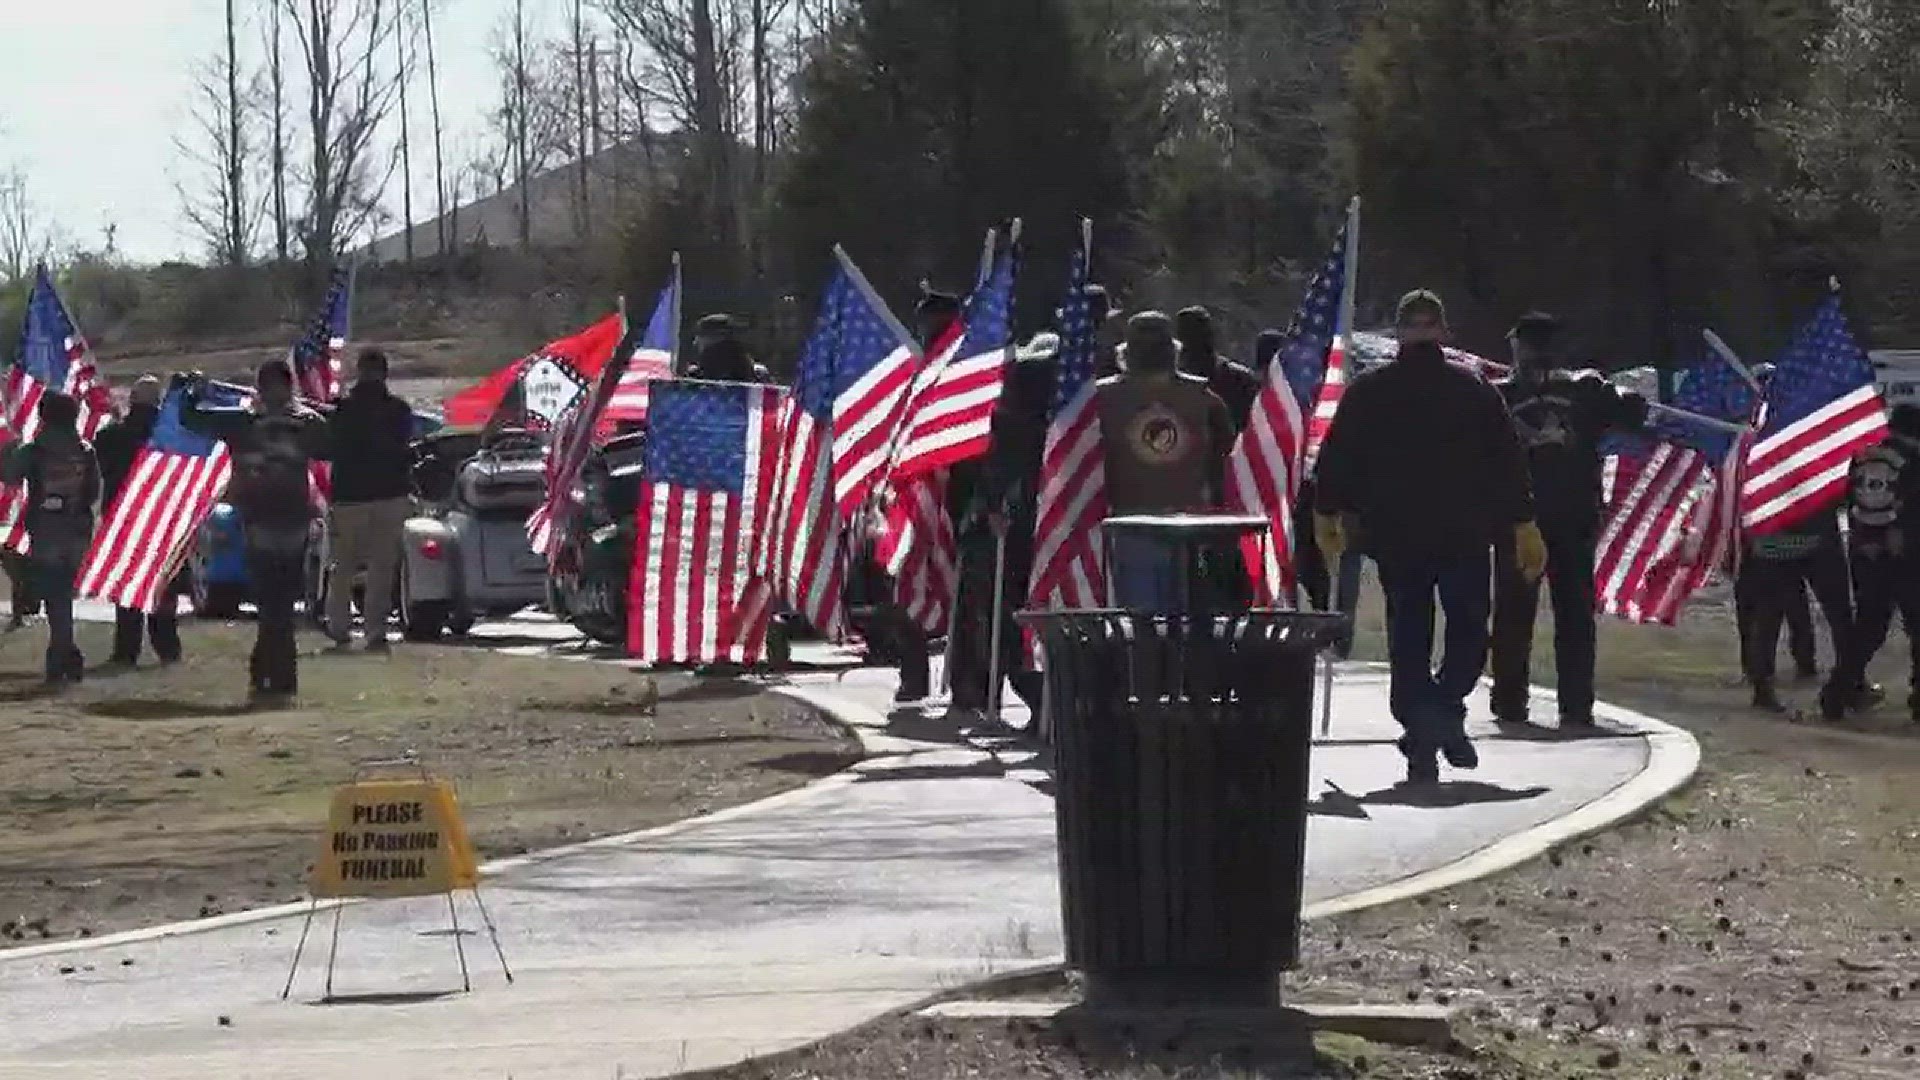 U.S Army Veteran Wilson Robert Selick was born Oct. 22, 1947 and died July 12, 2017. They could not find any of his blood relatives so his veteran brothers attended his funeral.